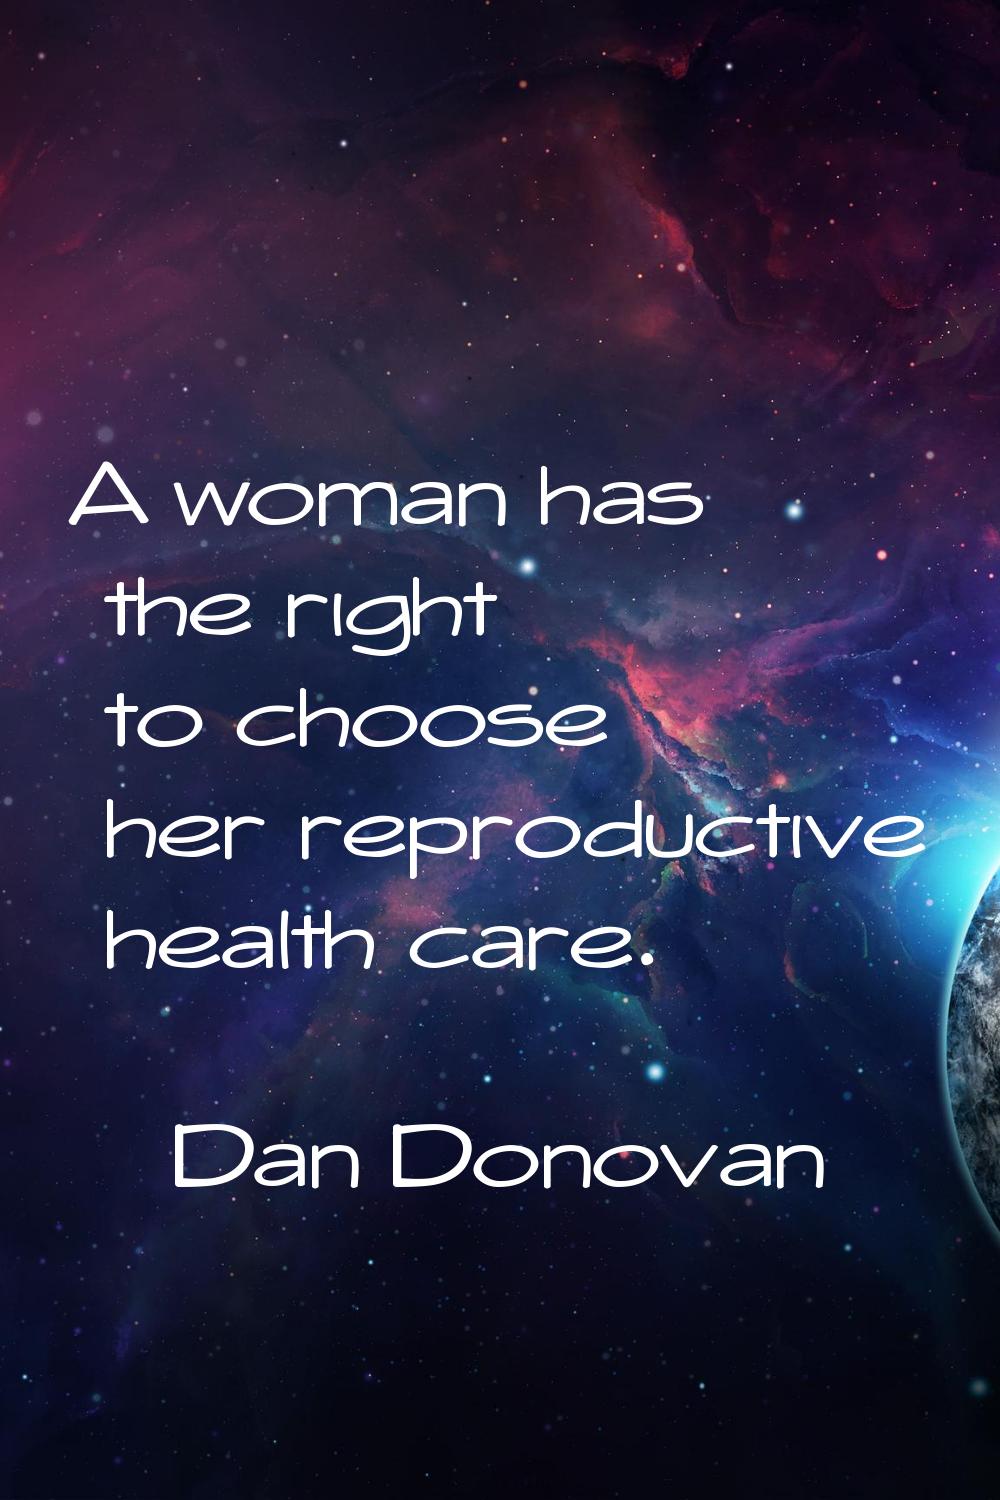 A woman has the right to choose her reproductive health care.